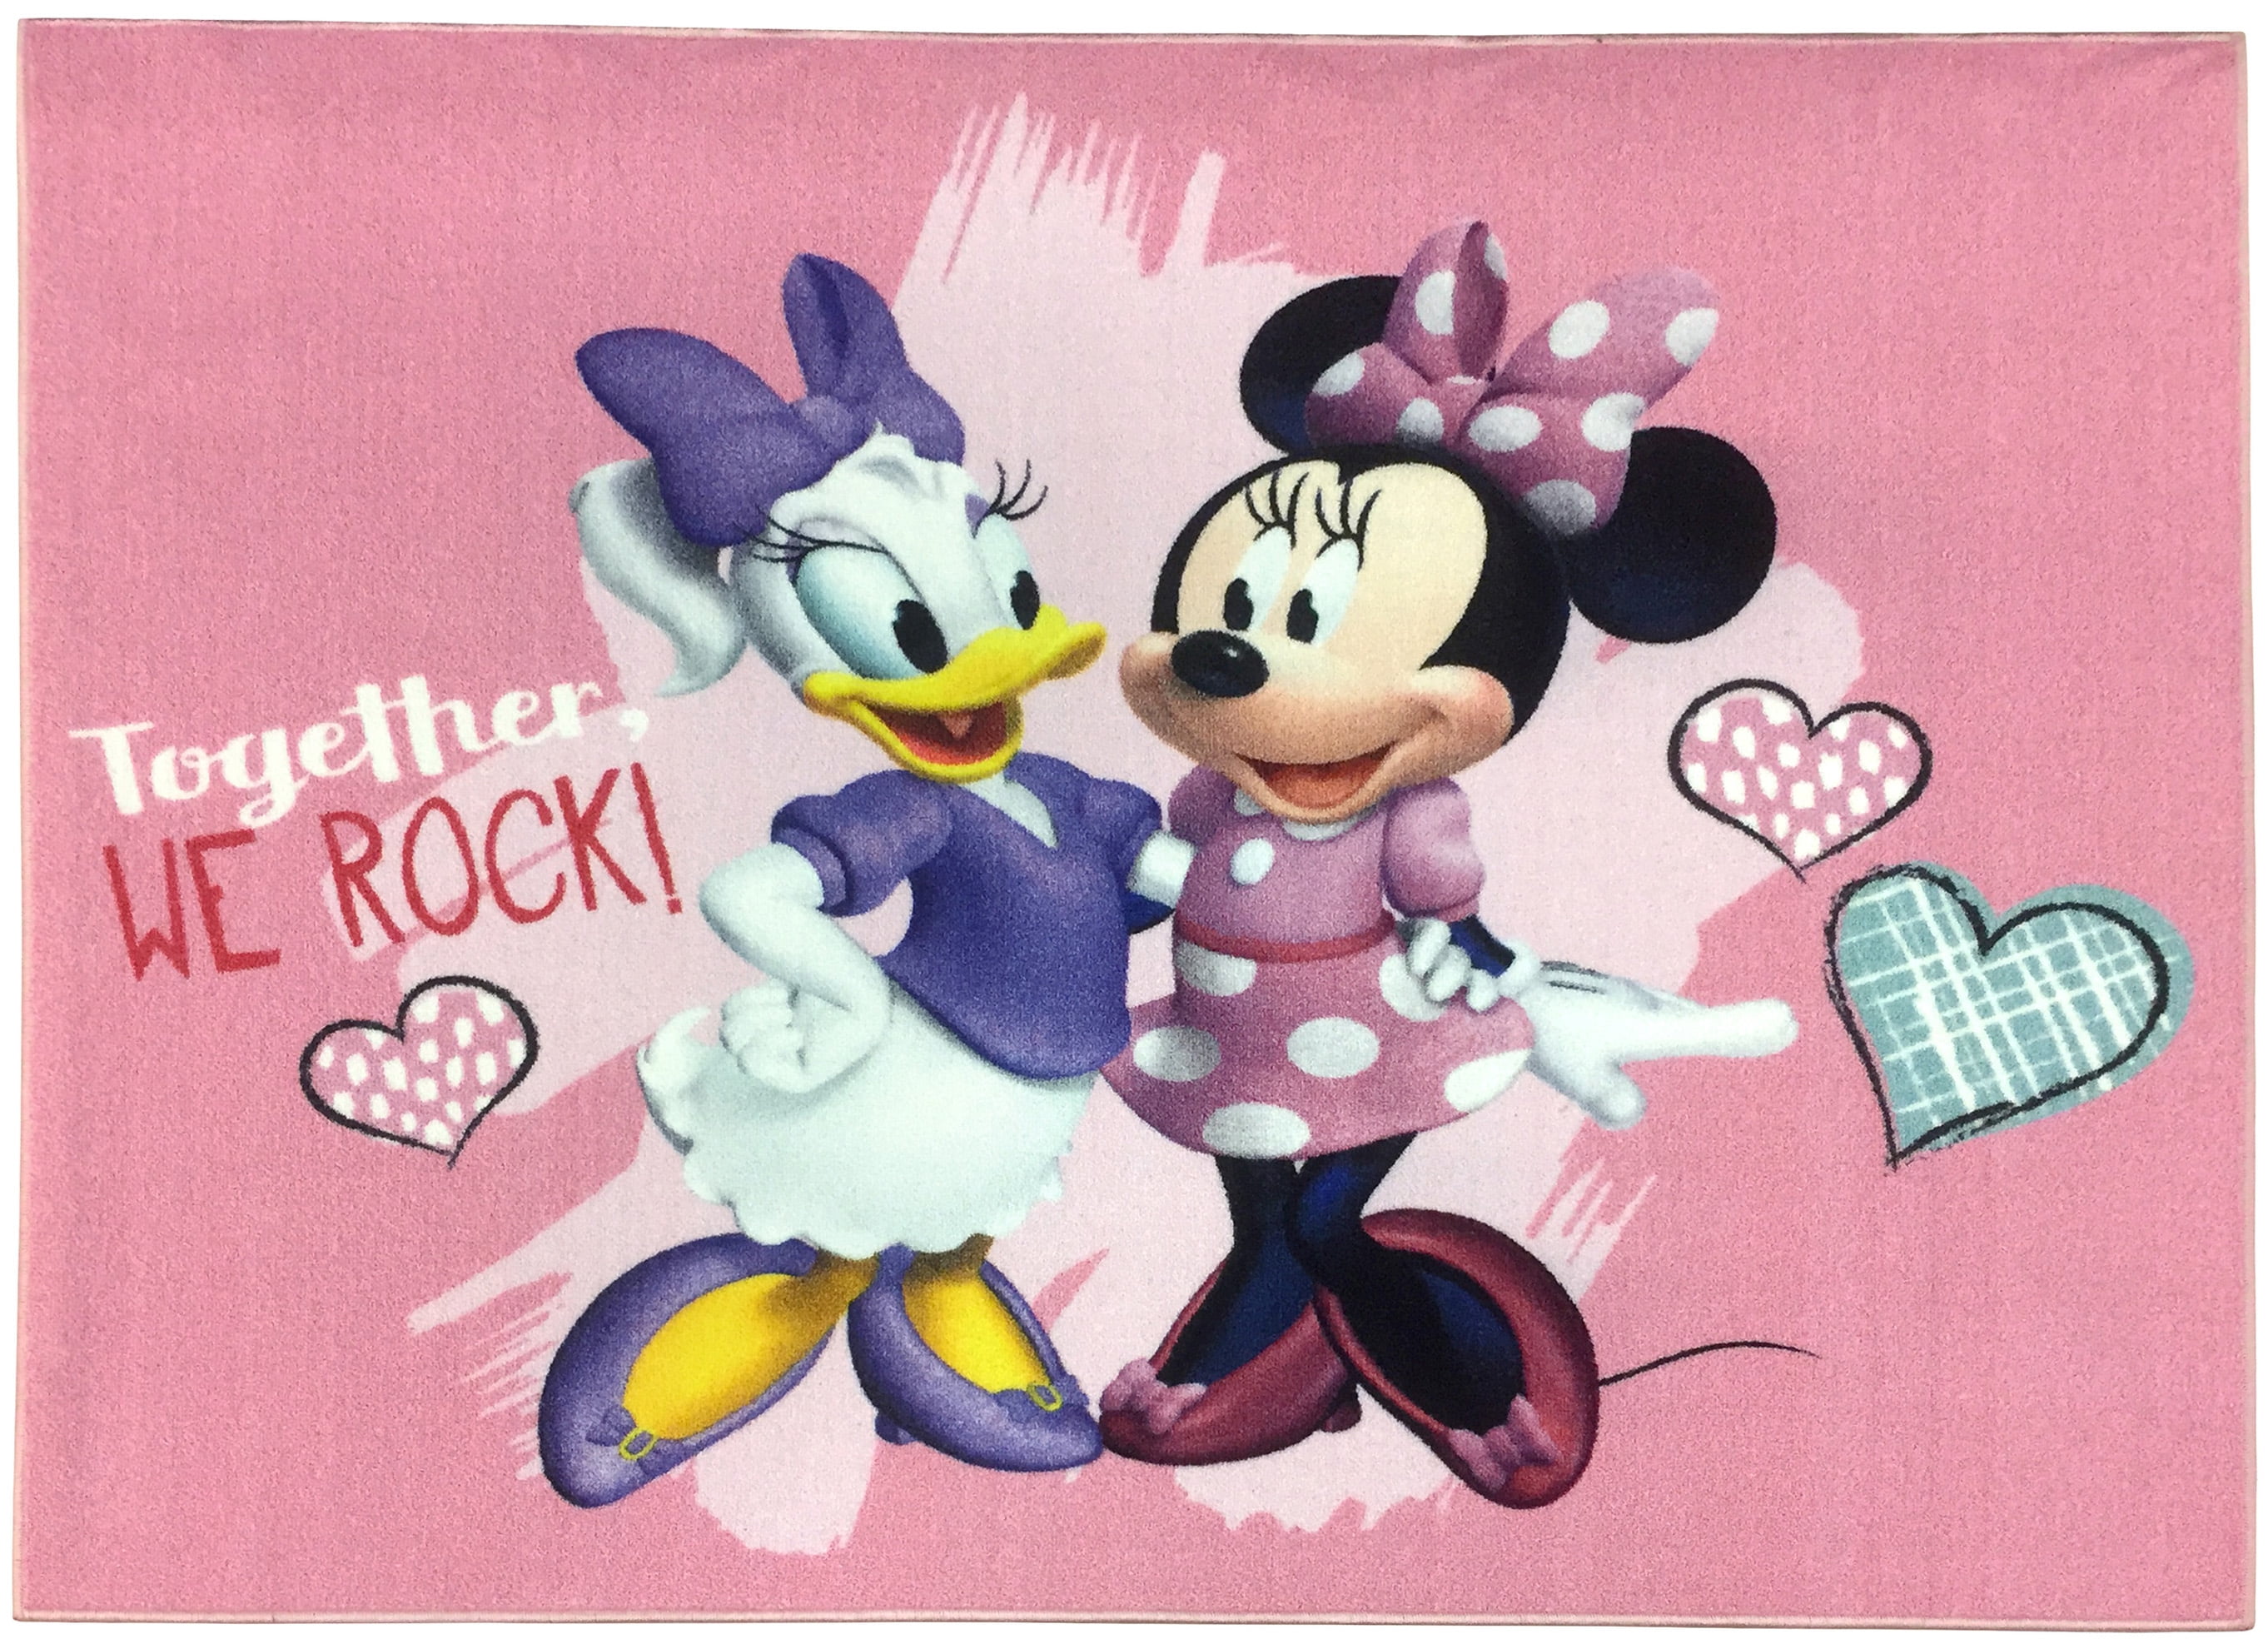 Large Area Rug Measures 4 x 5 Feet Jay Franco Disney Minnie Mouse Up Up Away Kids Room Rug Offical Disney Product 